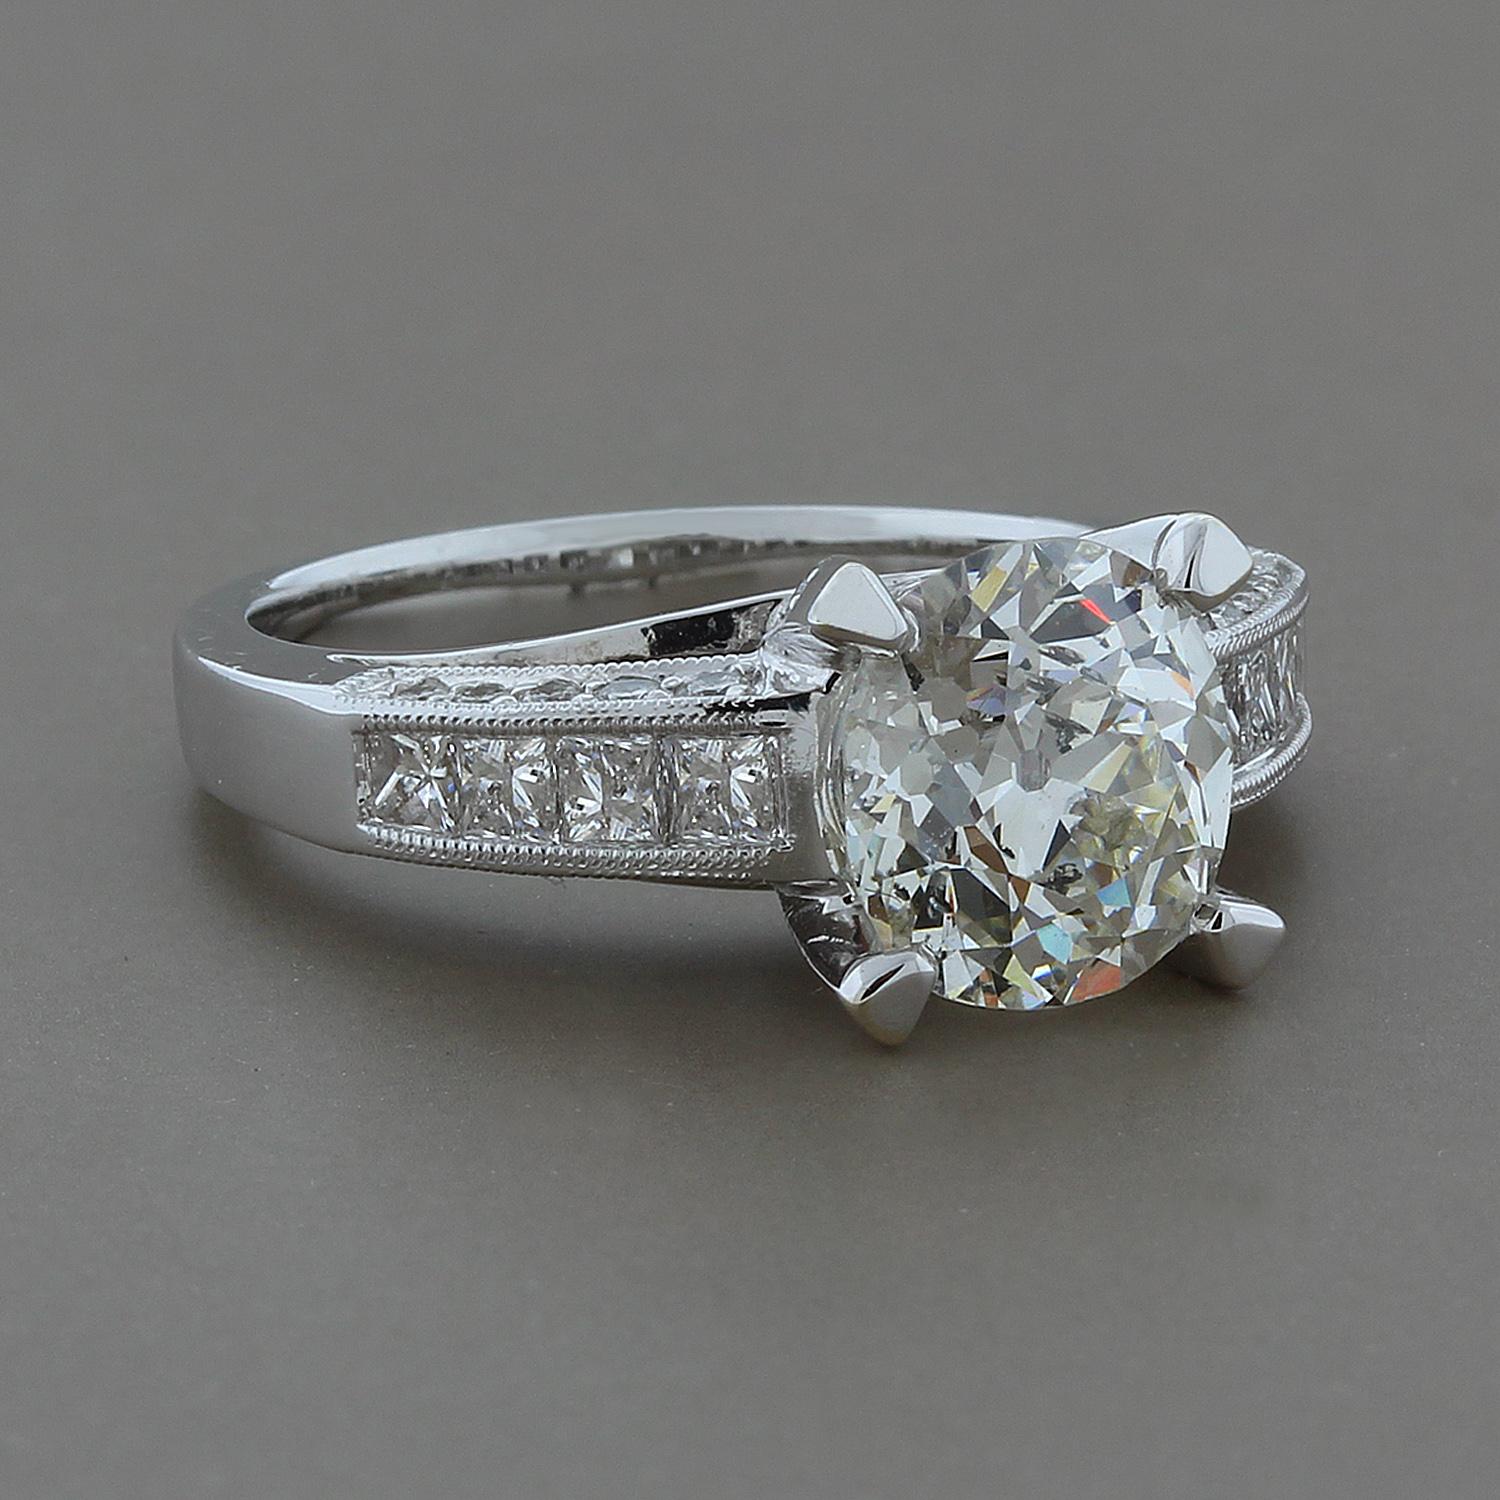 A beautiful diamond engagement ring that has features of old and new. The 2.65 carat diamond is a round European cut from the 1930's. It is mounted in a new 18K white gold ring to give it a more modern look. Get the best of both worlds - a classic